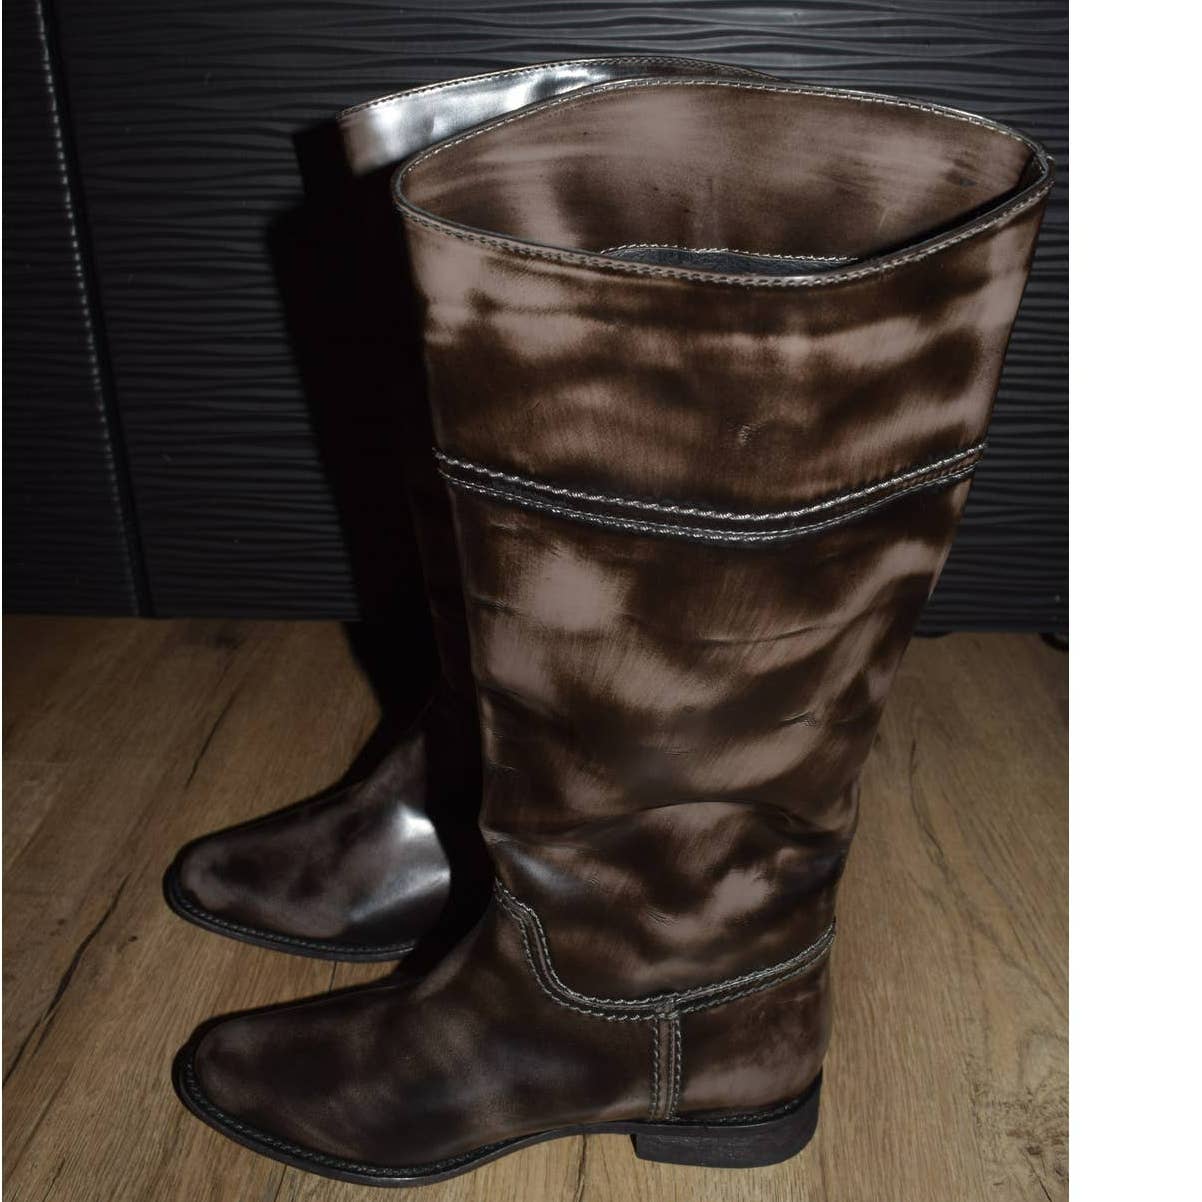 Initial Brown Heeled Patent Leather Boots - 36 / 6